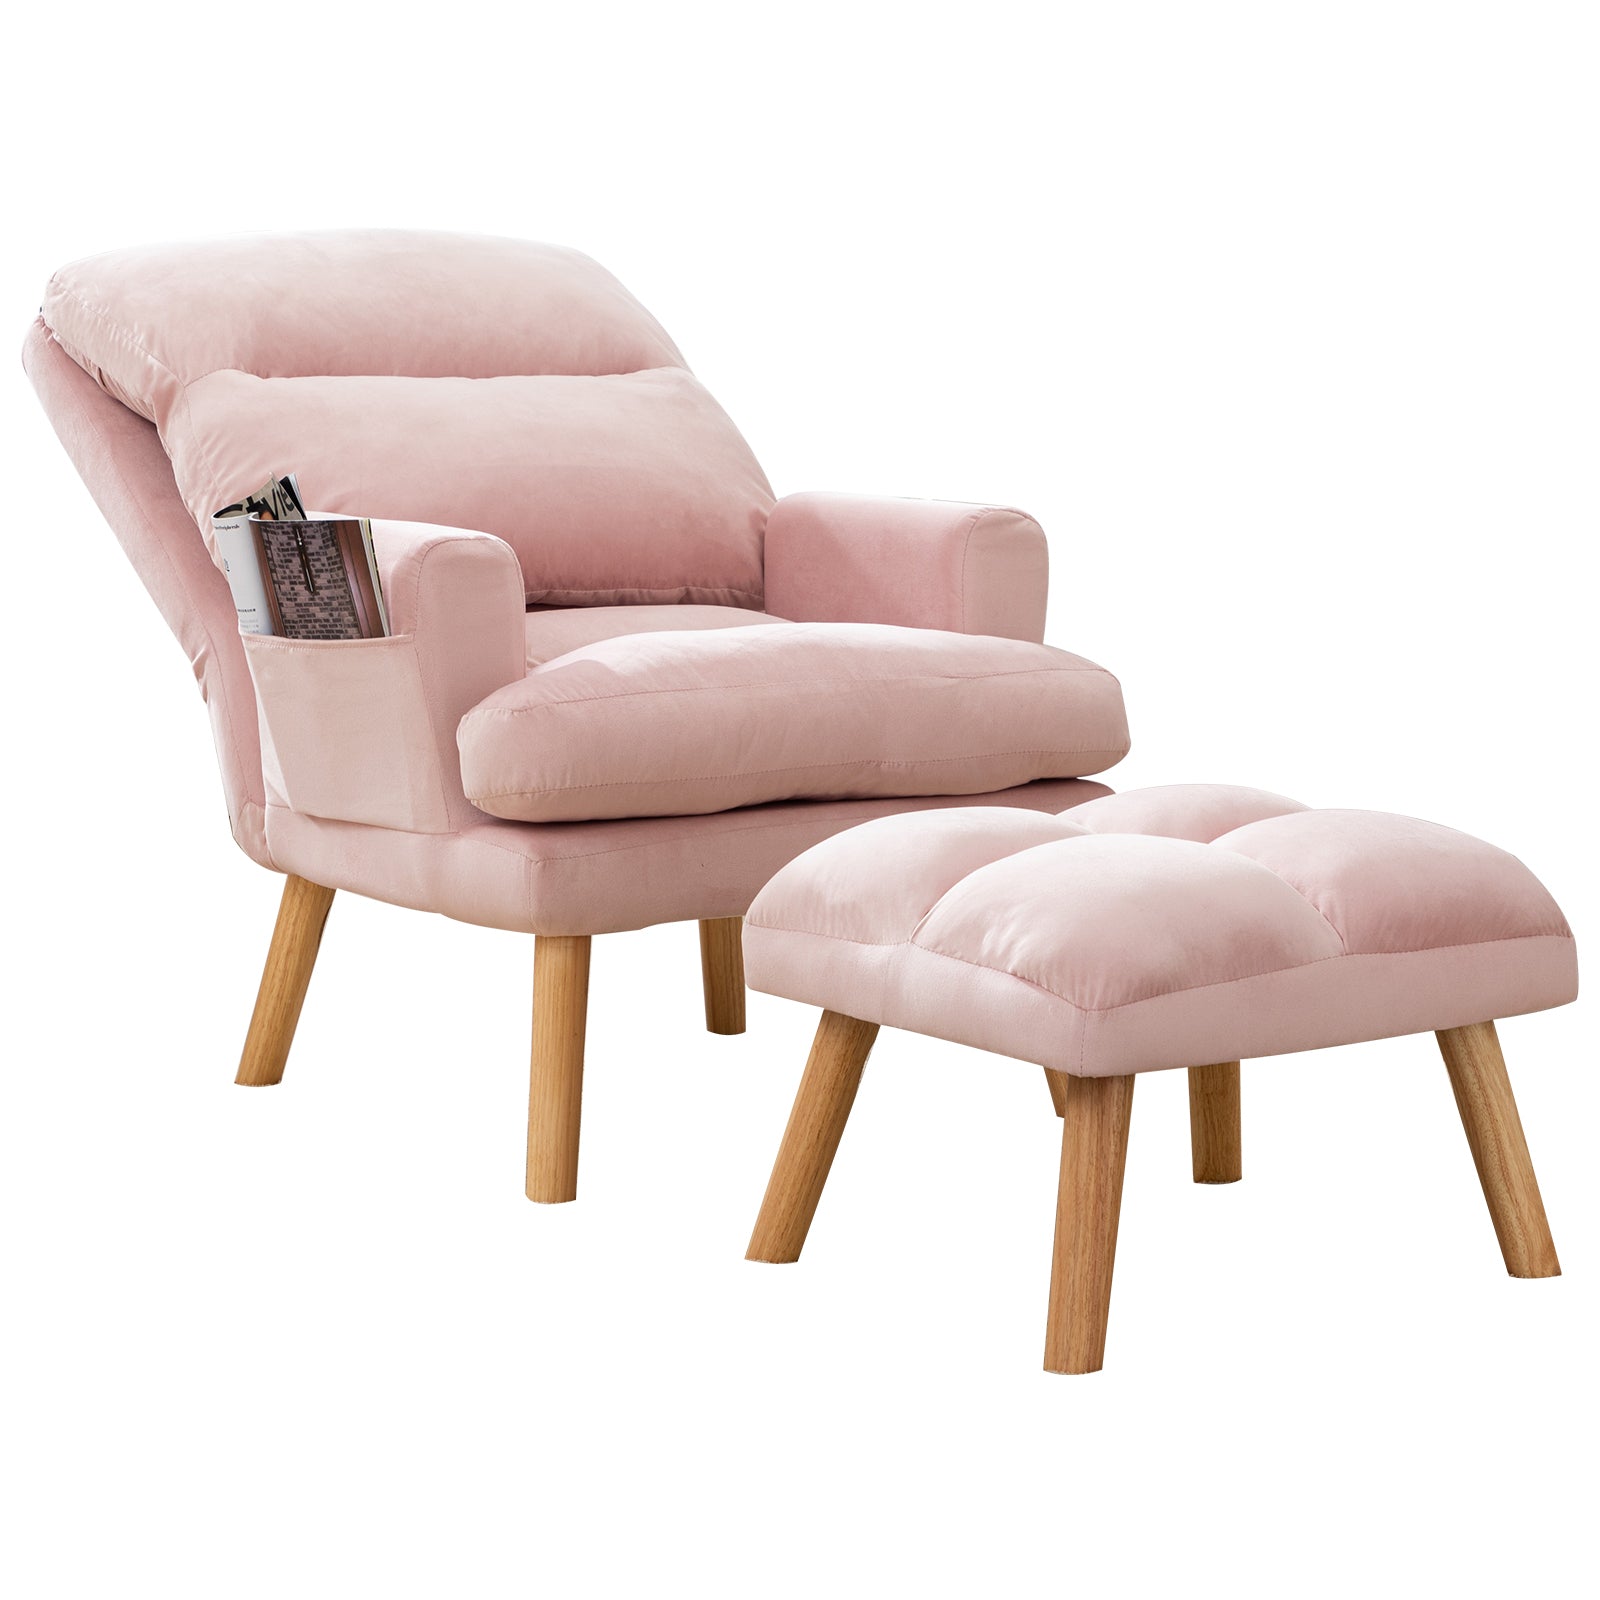 Contemporary Elegance Accent Chair with Footrest, For pink-primary living space-rubberwood-velvet